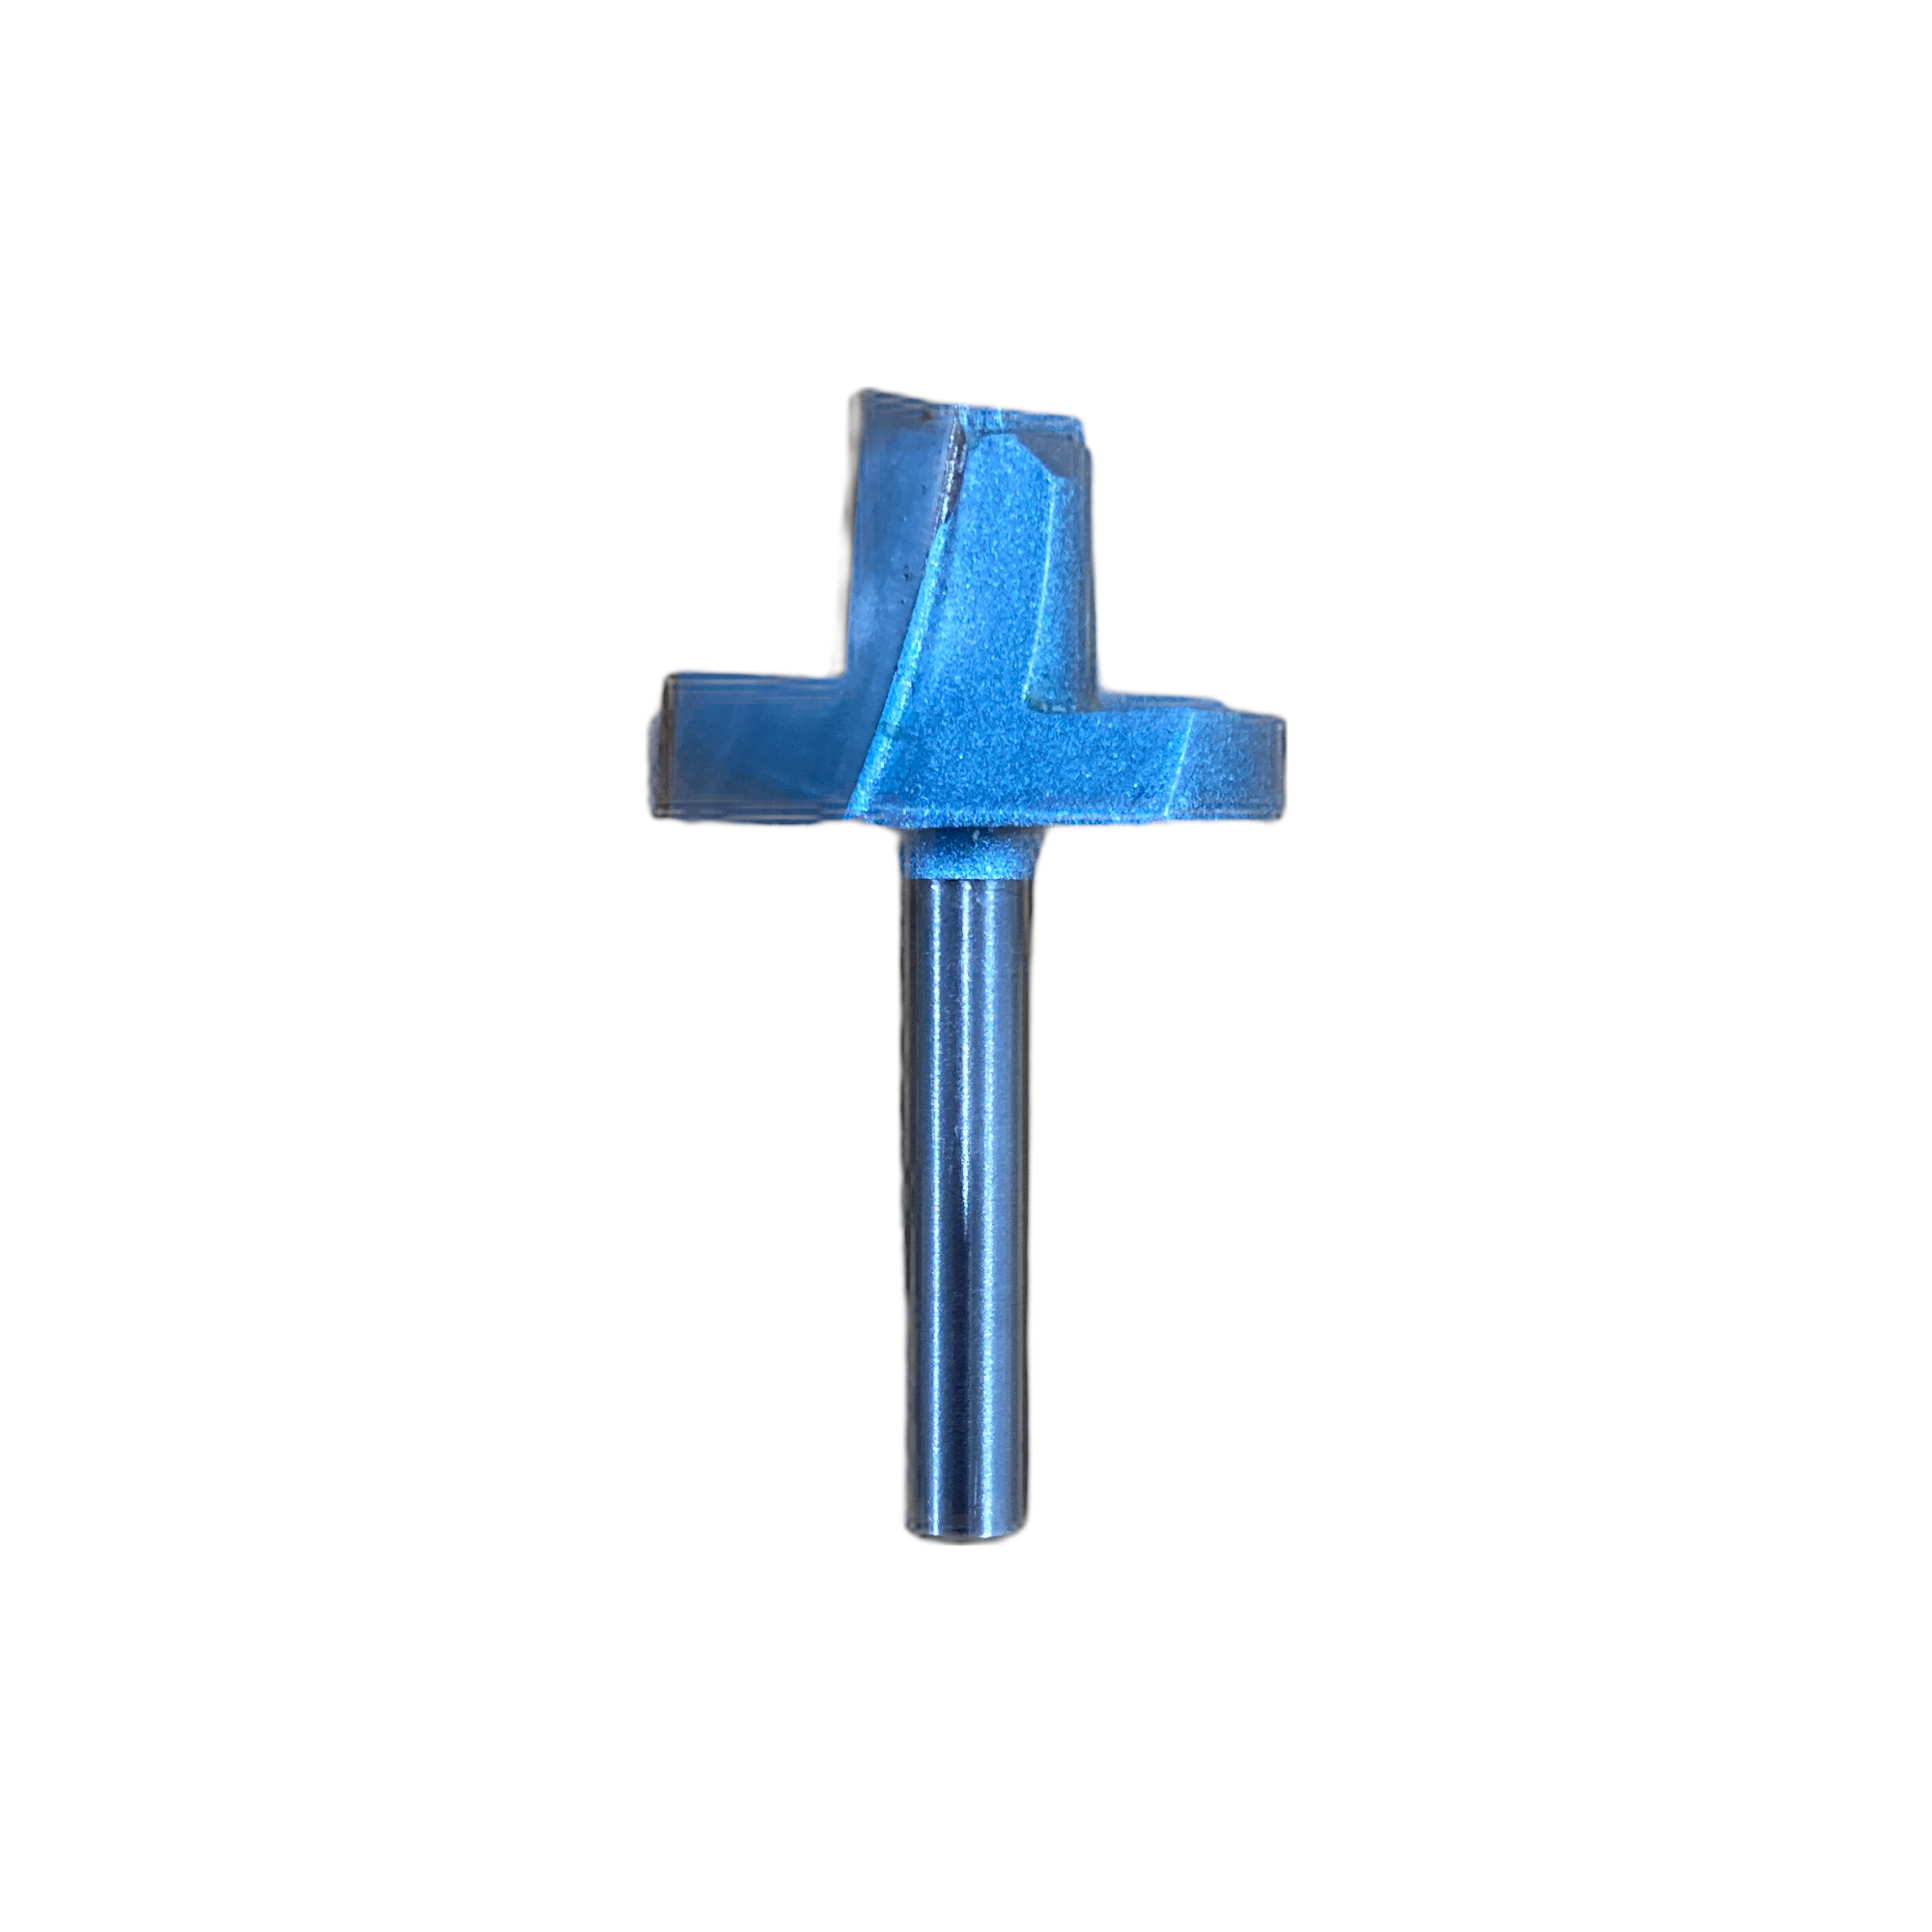 Modii One-pass Cutter Bit size 1/2" (Futures compatible)